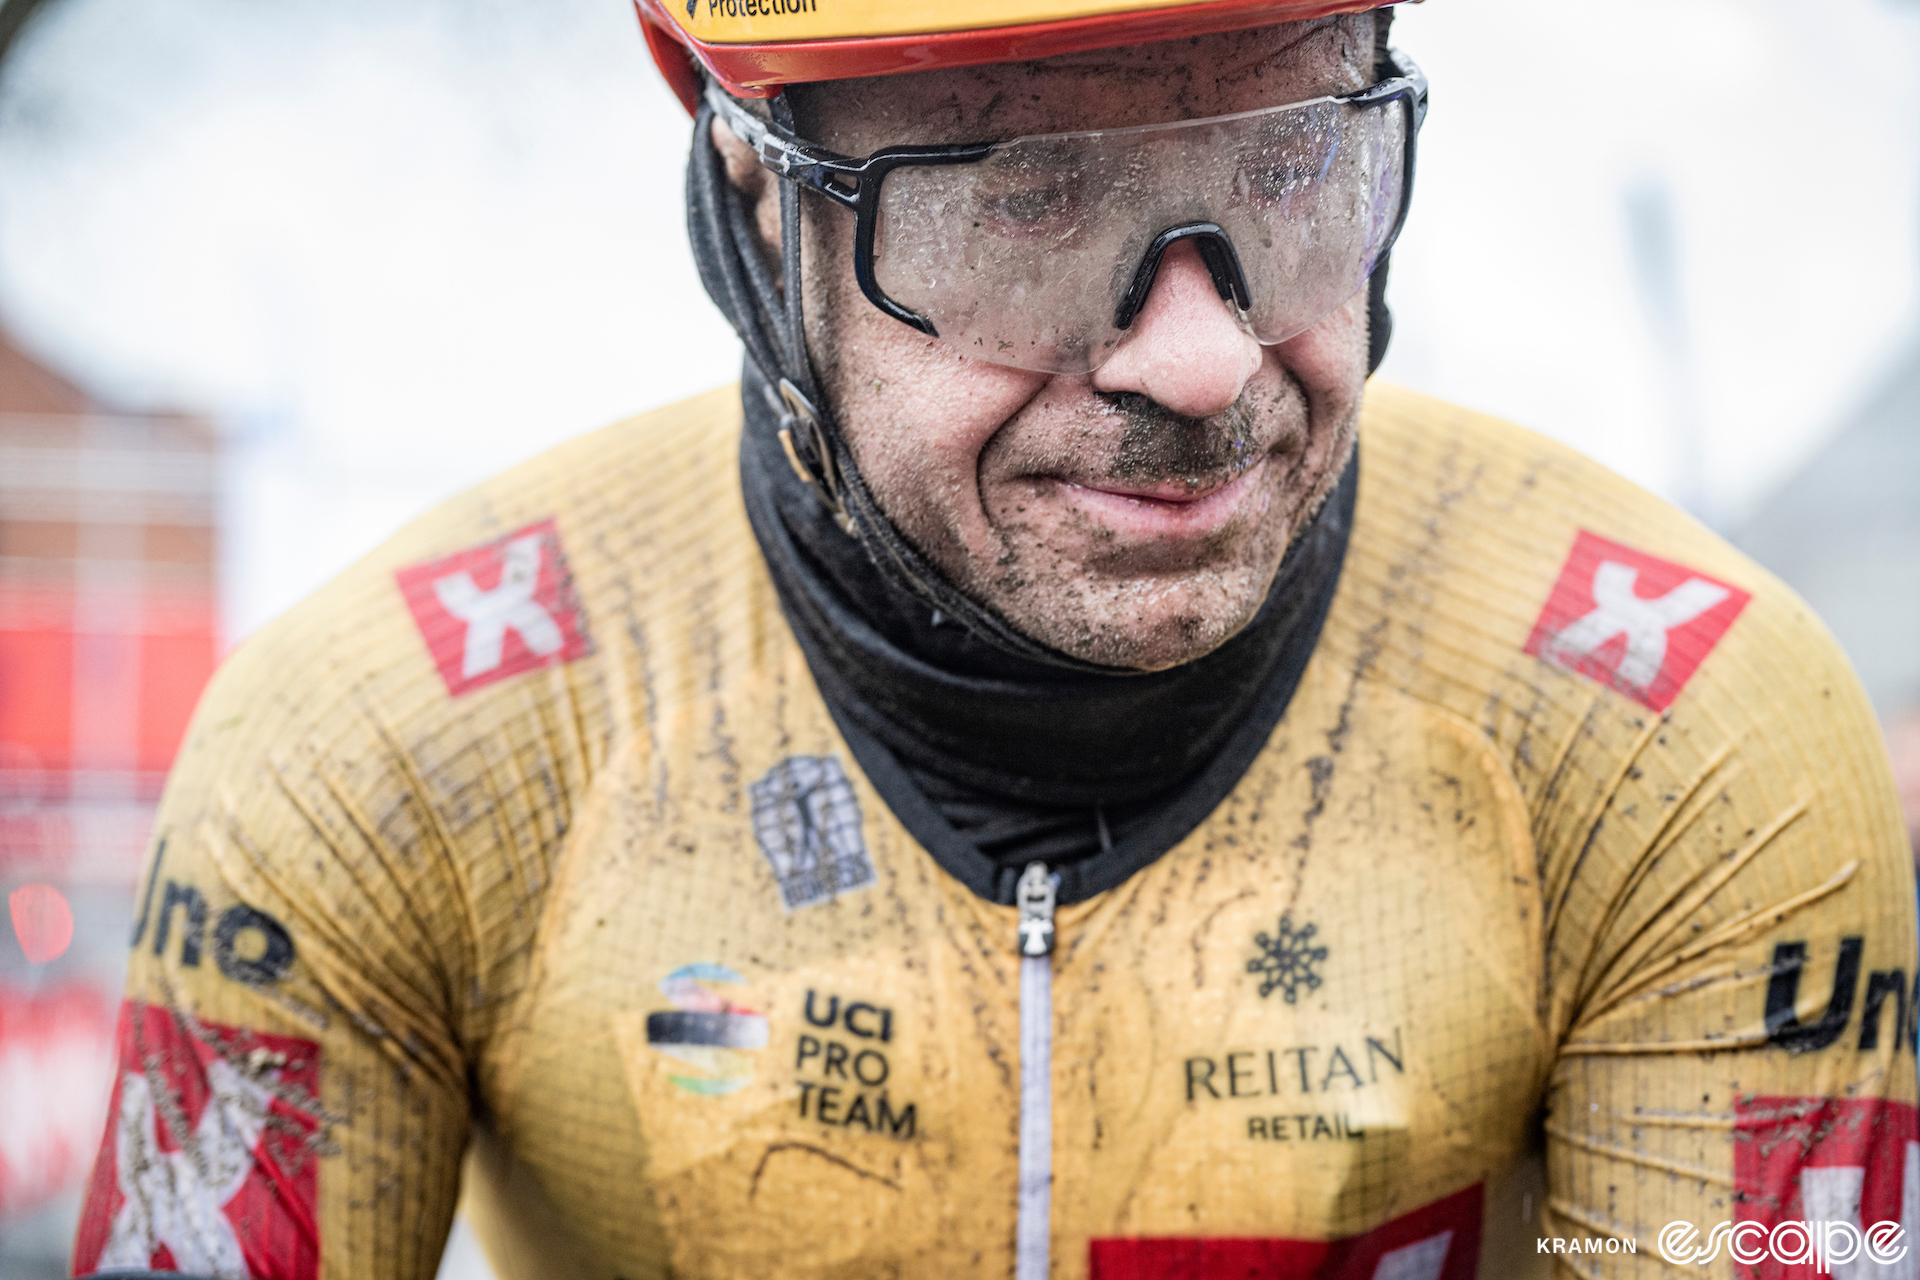 Alexander Kristoff sits at the finish line of the 2023 Gent-Wevelgem race. He is covered in grit, his glasses, face, and jersey speckled with grime and his jersey and balaclava soaked. He has a grim expression.